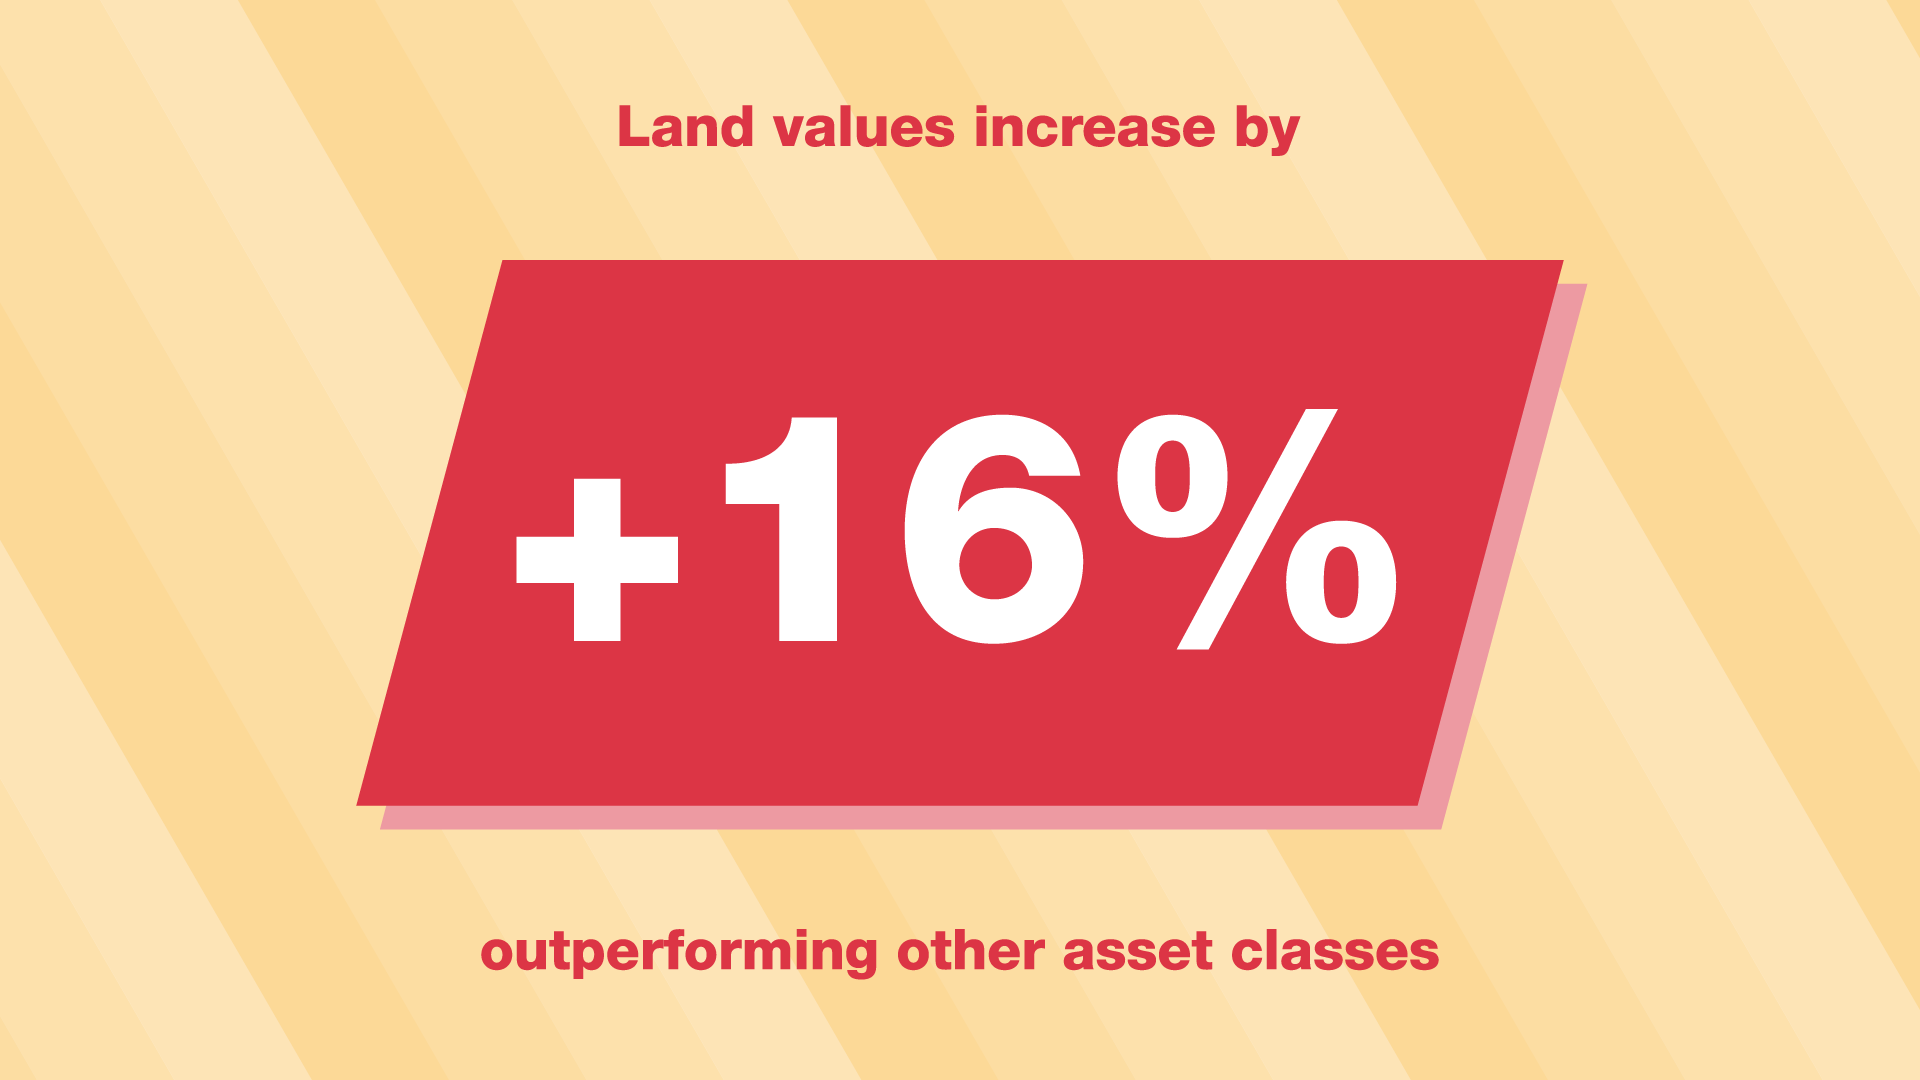 Land values increase by 16%